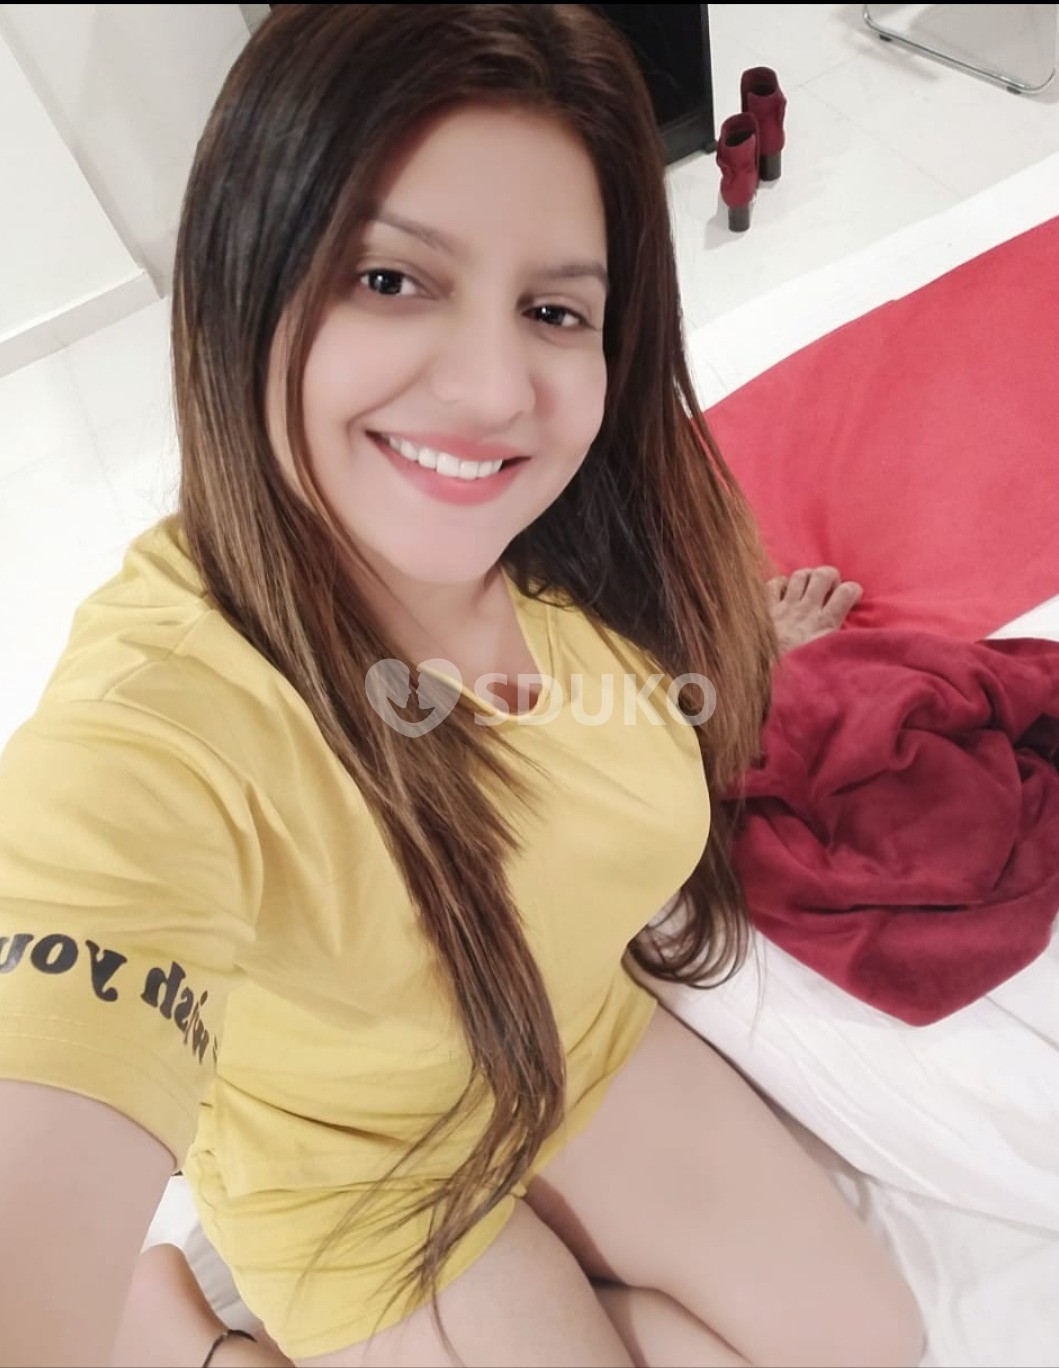 ULSOOR HOT 💋👅 SEXY GIRL AVAILABLE ANAL ORAL BLOWJOB AVAILABLE ANYTIME CALL ME